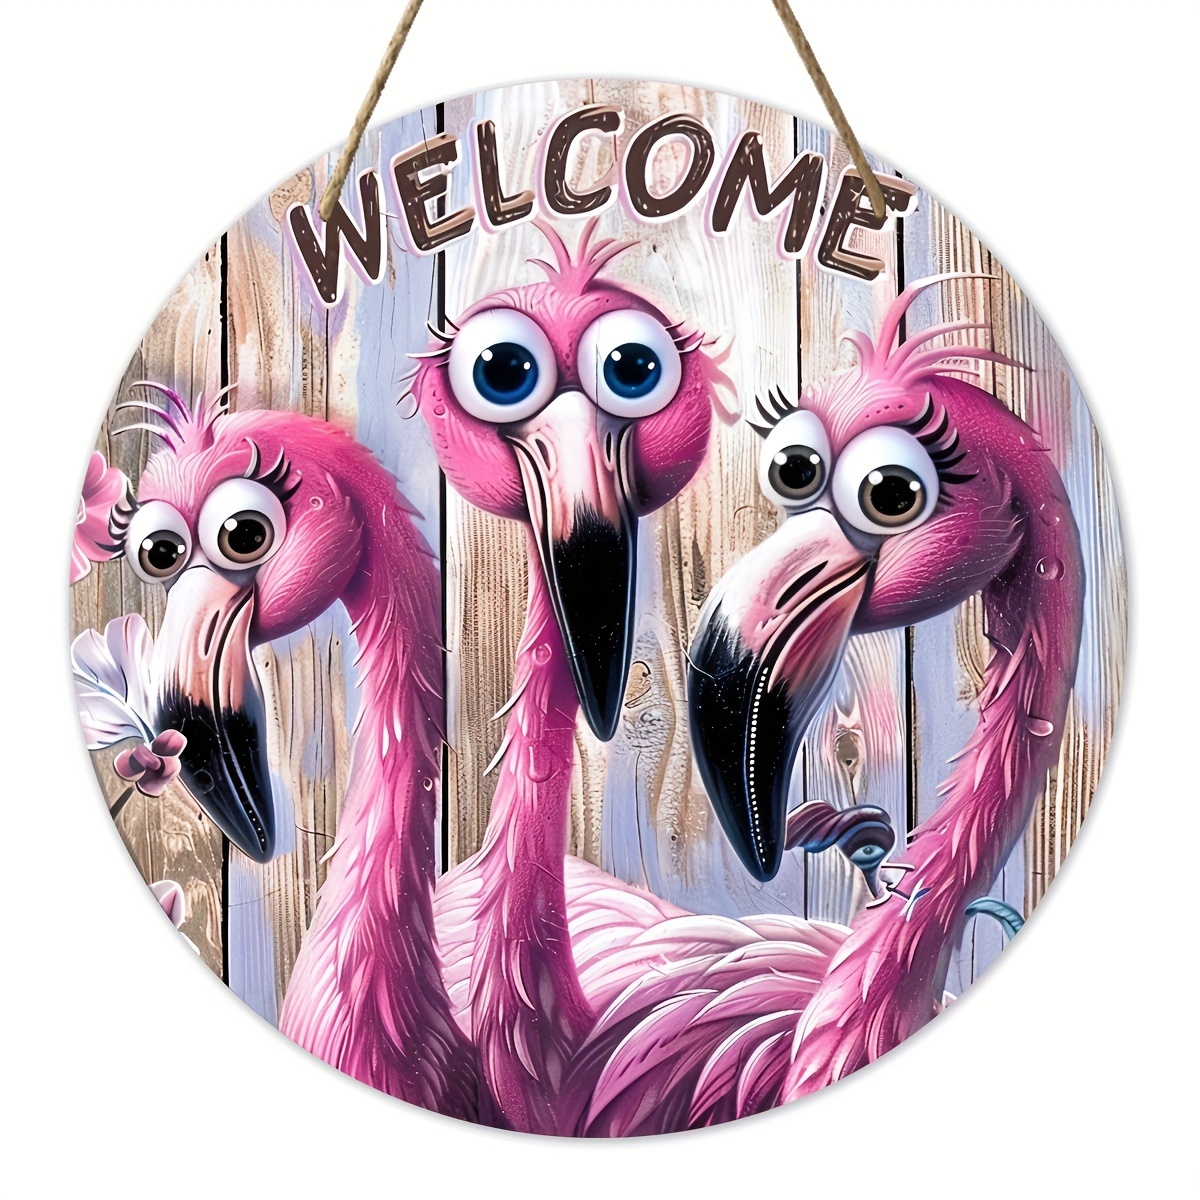 

Charming Flamingo Welcome Sign - 7.9"x7.9" Pink Wooden Wall Decor For Home, Room Aesthetics & Front Door - Perfect Gift For Friends, Farmhouse Porch Accent Flamingo Decor Flamingo Yard Decor